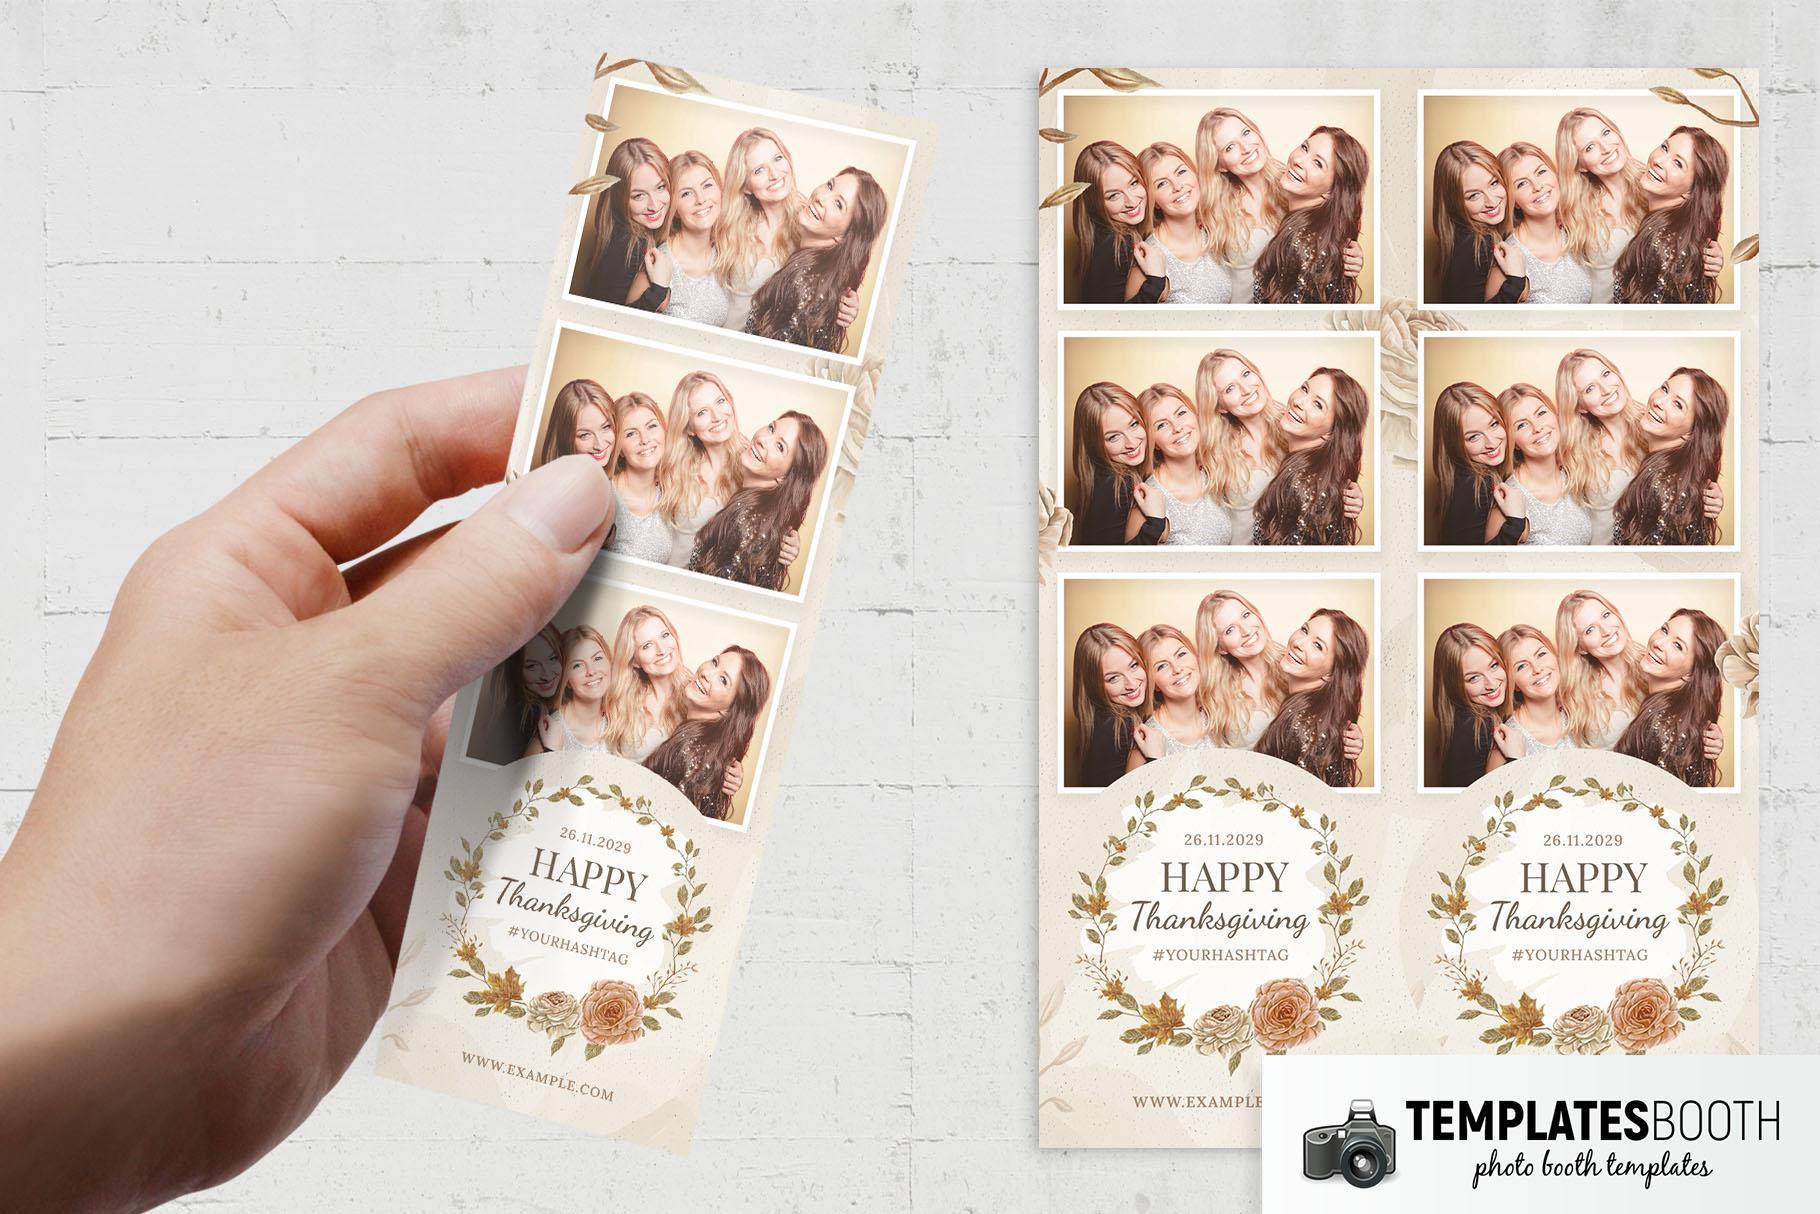 Rustic Thanksgiving Photo Booth Template